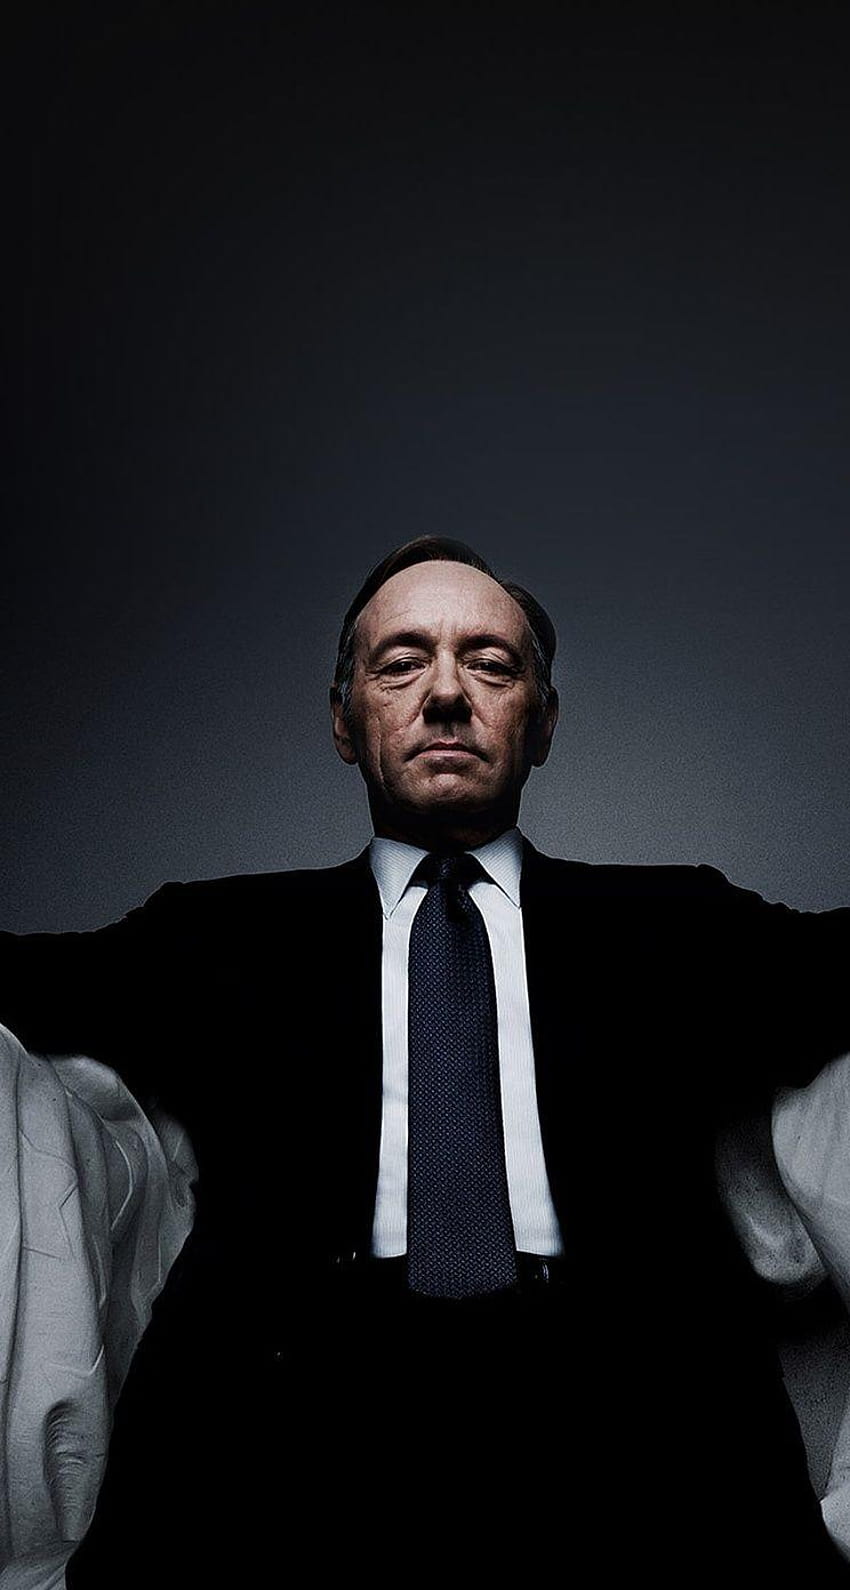 House of Cards, Kevin Spacey 2019 Tapeta na telefon HD